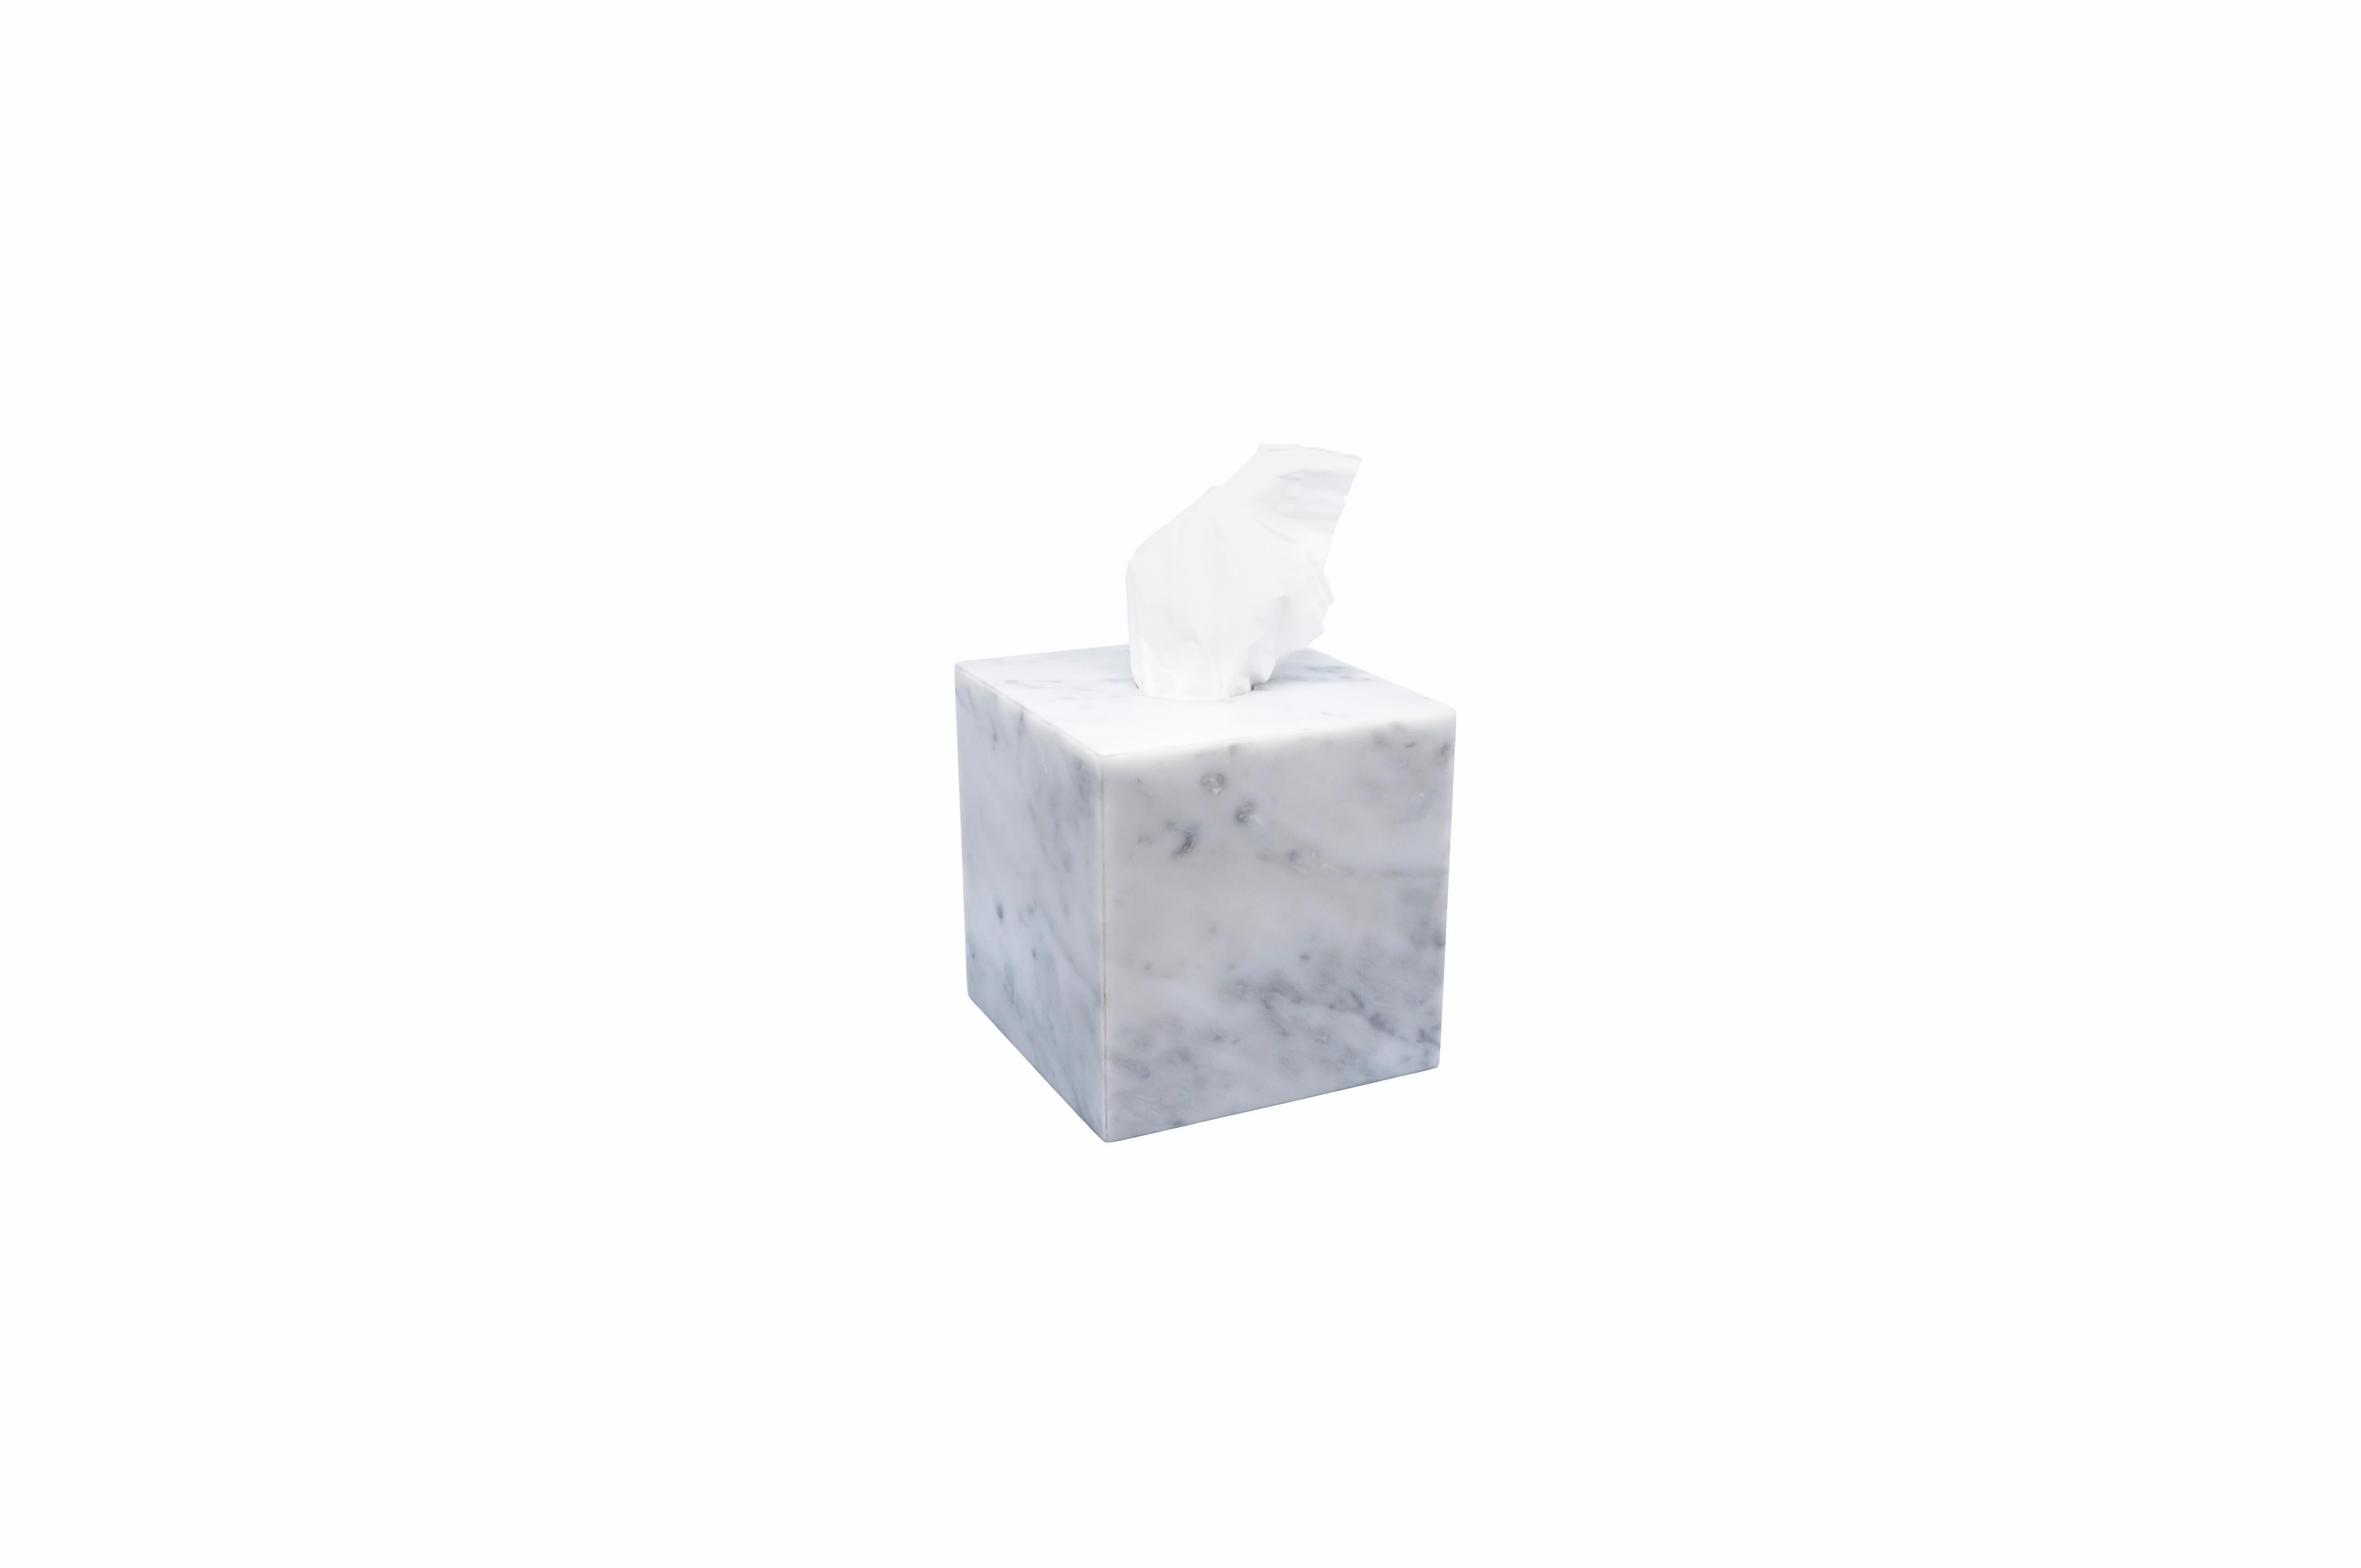 Handmade Squared Tissues Cover Box in White Carrara Marble For Sale 1